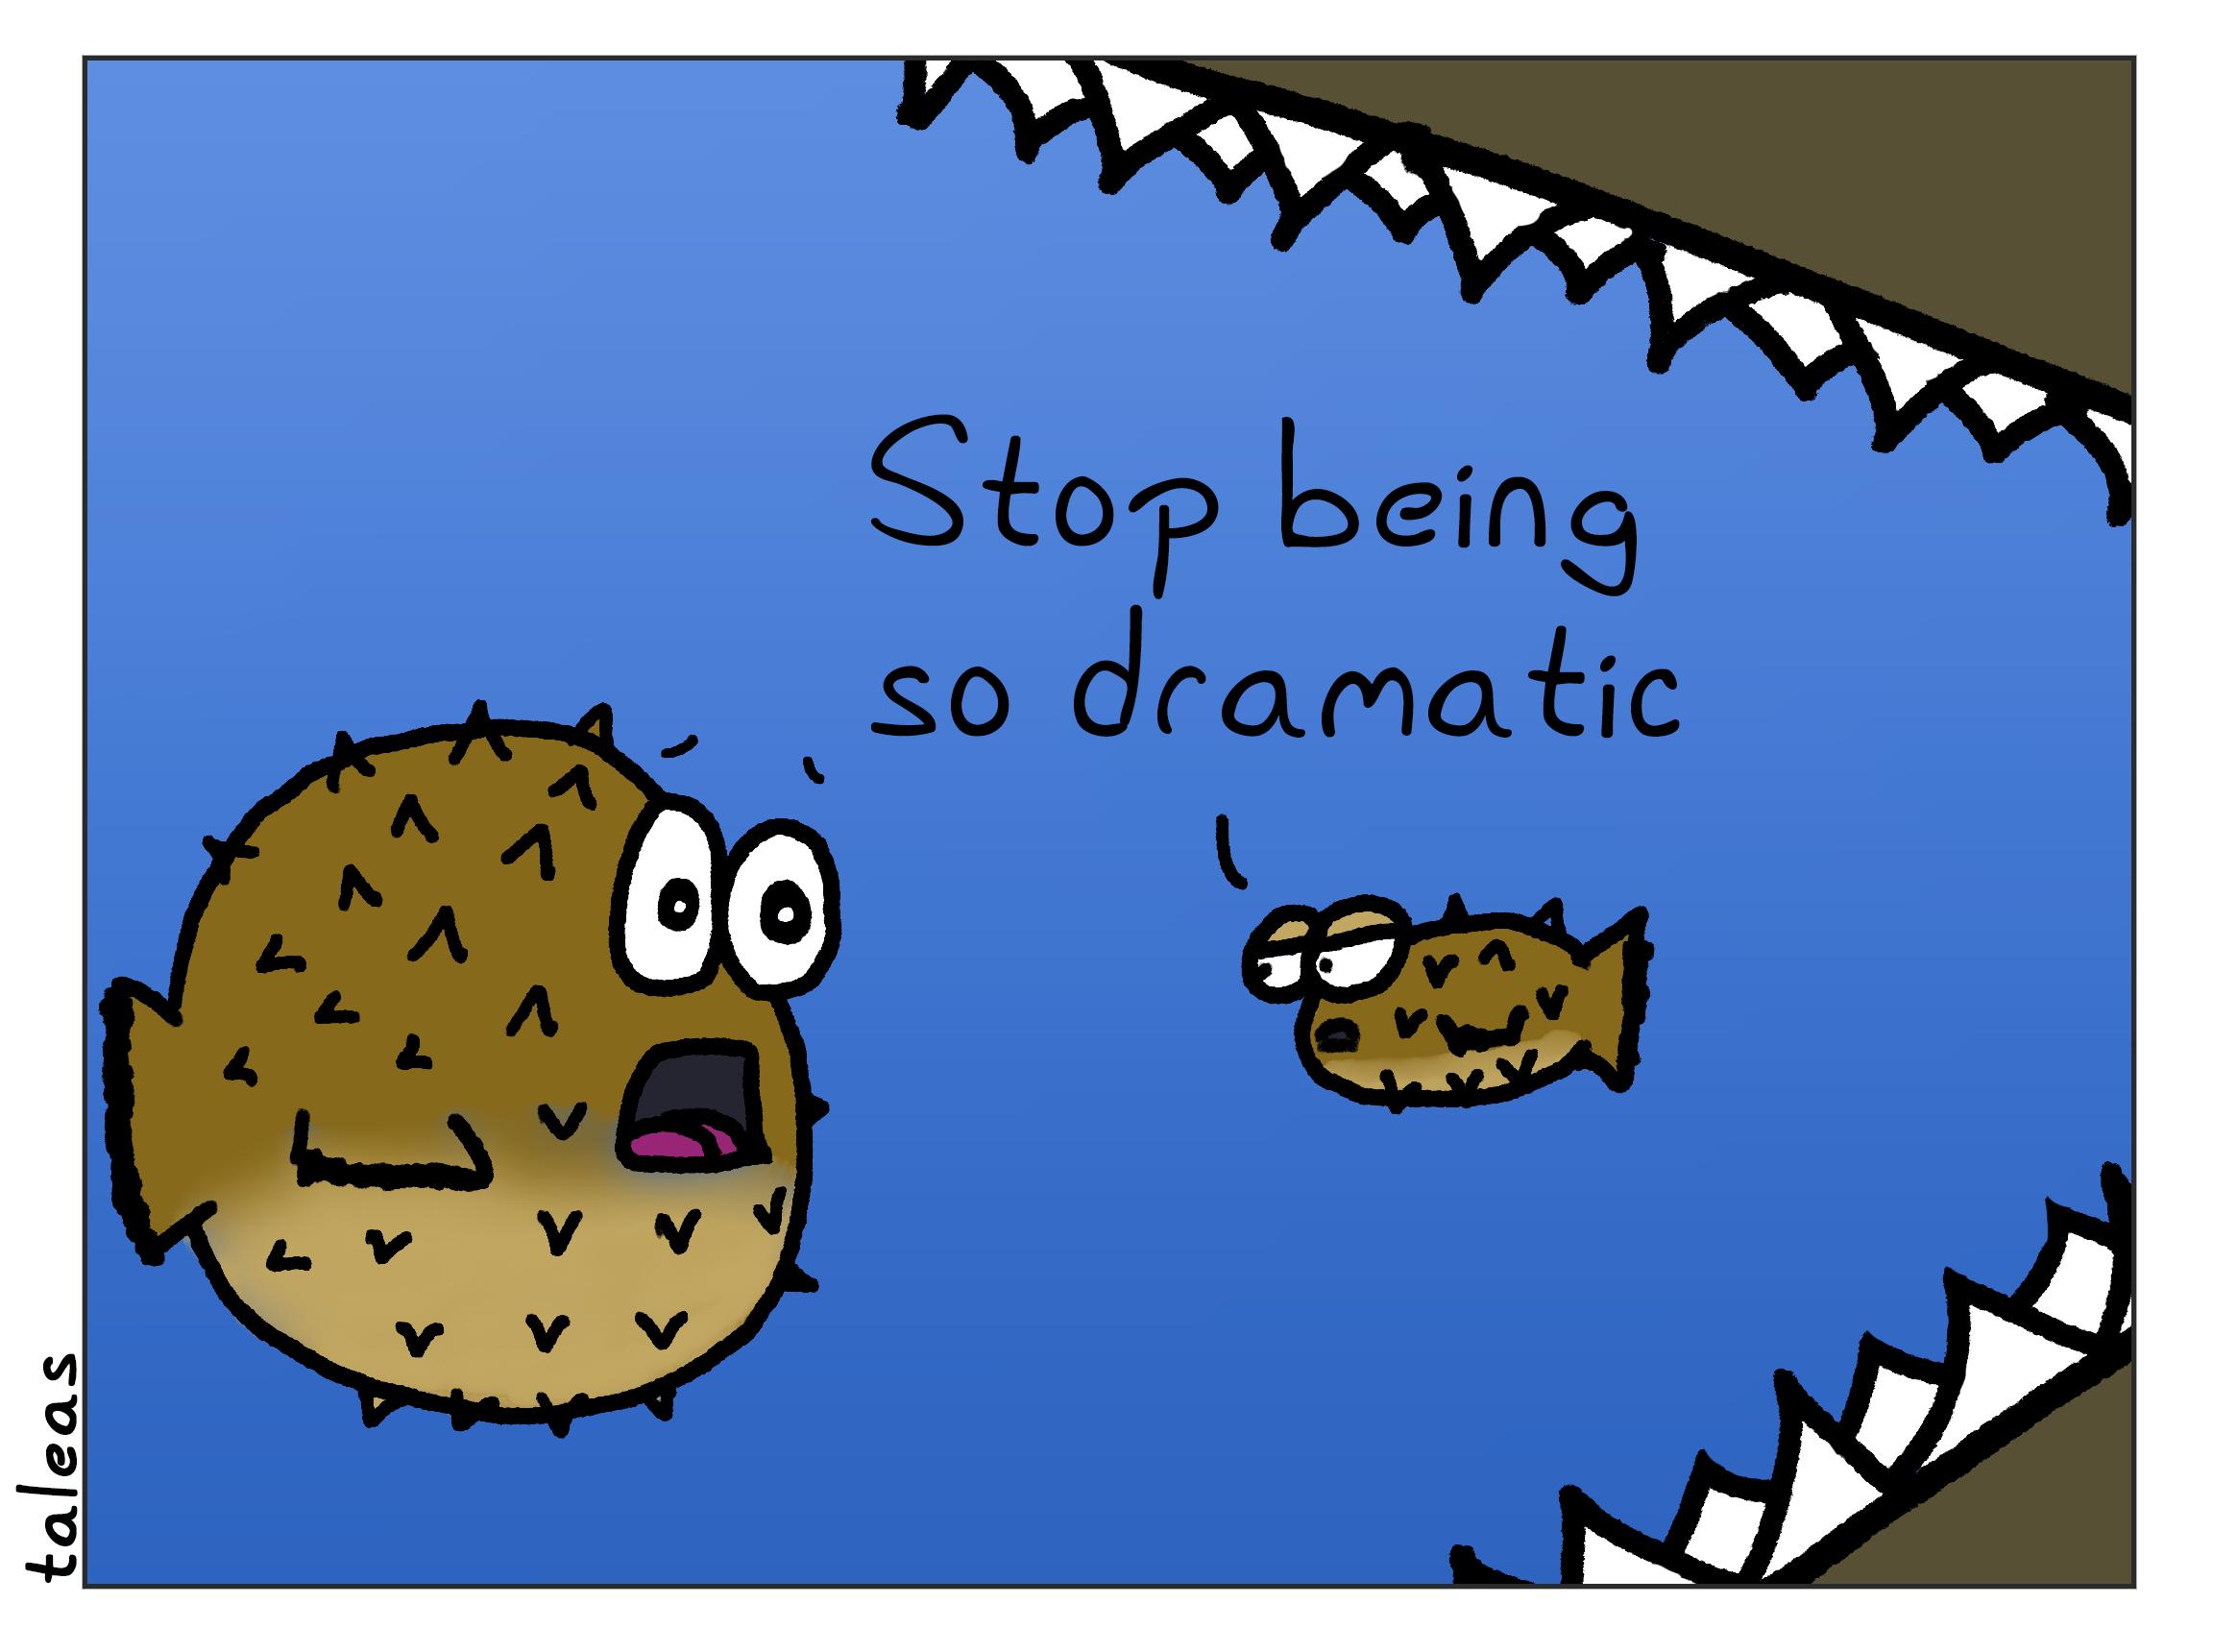 A smaller puffer fish is admonishing a visibly distressed, larger, and fully puffed-up puffer fish to, "Stop being so dramatic".  The larger puffer fish is, in fact, reacting to an extremely large, toothy sea monster directly behind the smaller puffer fish.